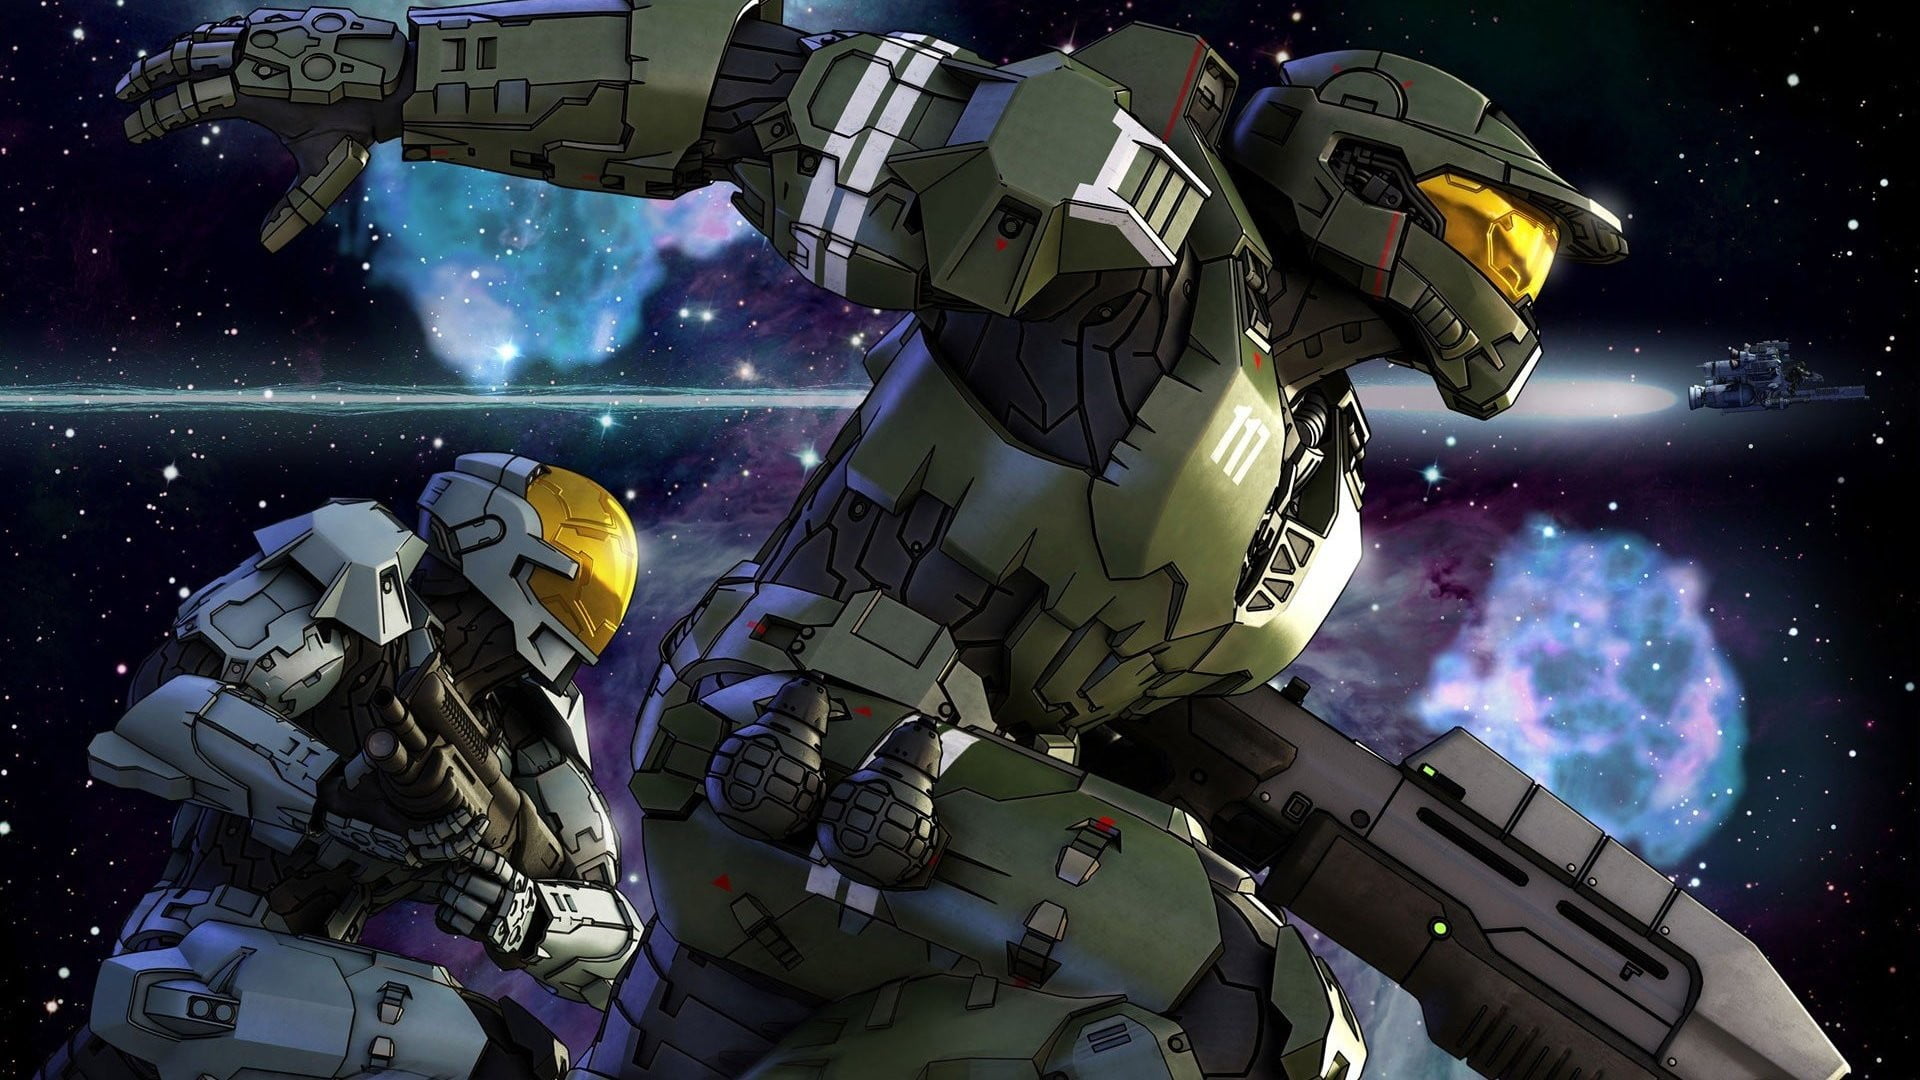 two black and green robot character wallpapers, Halo, Master Chief, Xbox, video games